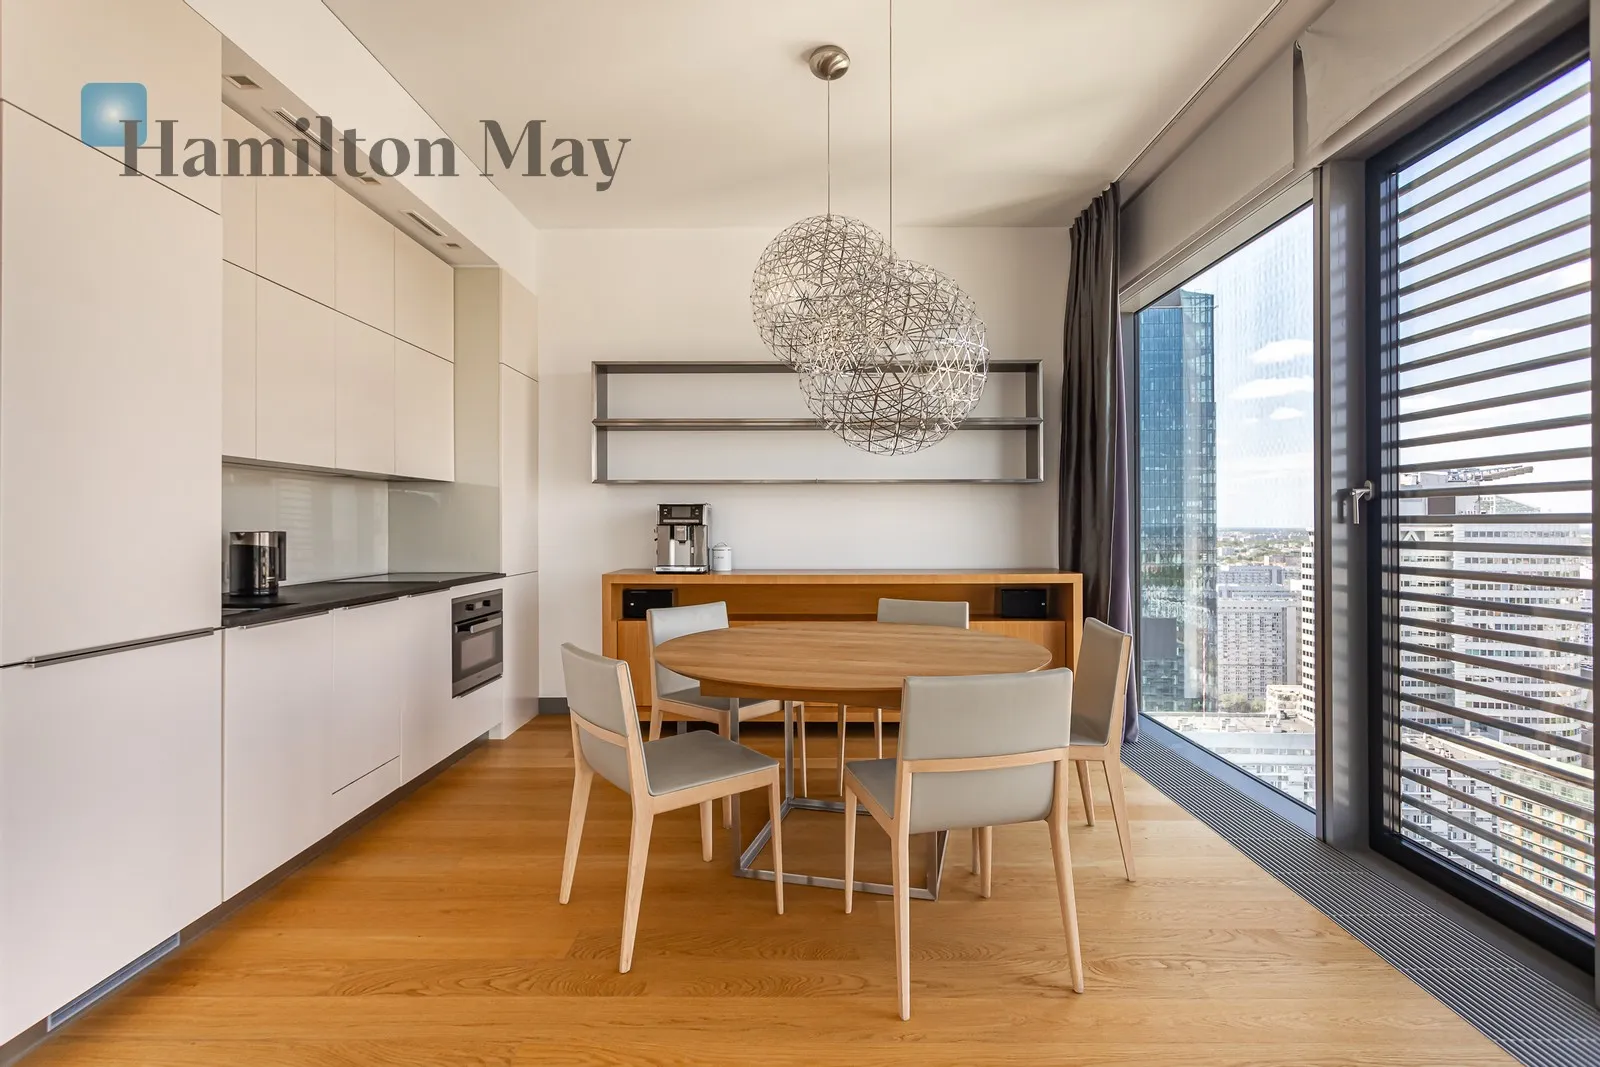 Elegant, one bedroom apartment with a view over the city skyline in the Cosmopolitan building - slider